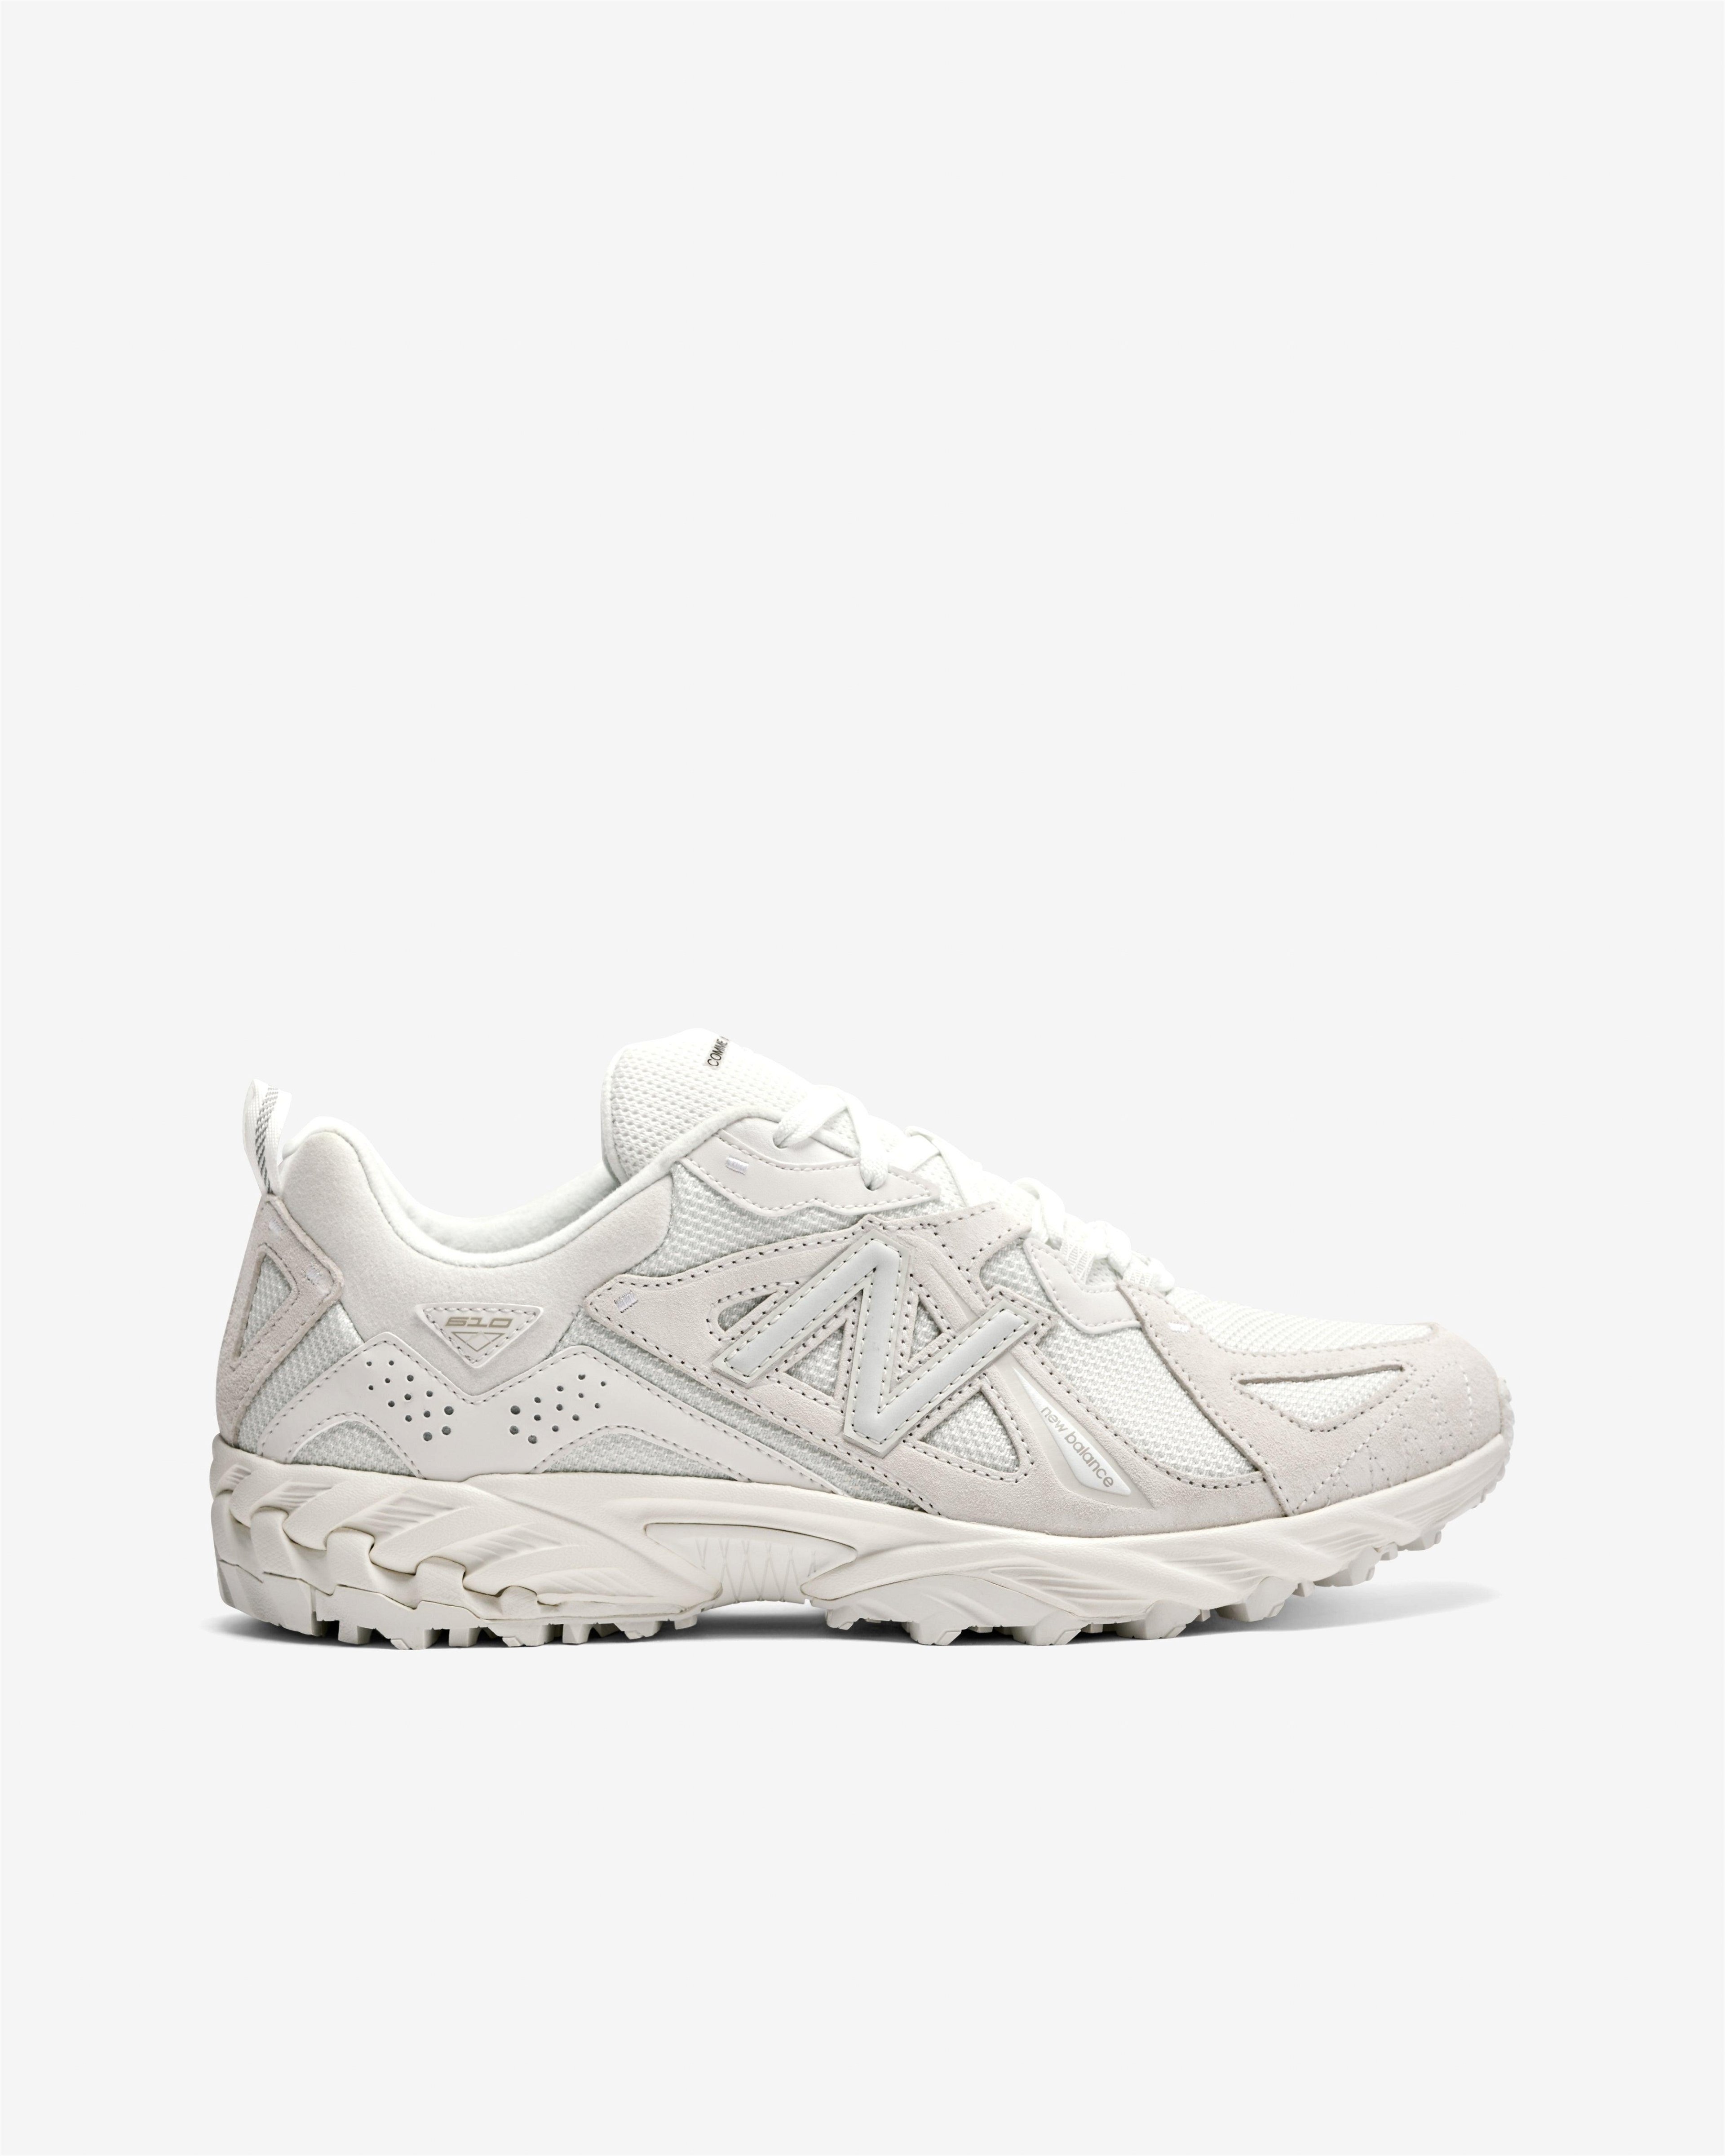 Comme des Garçons Homme - New Balance ML610TCG - (White) by HOMME